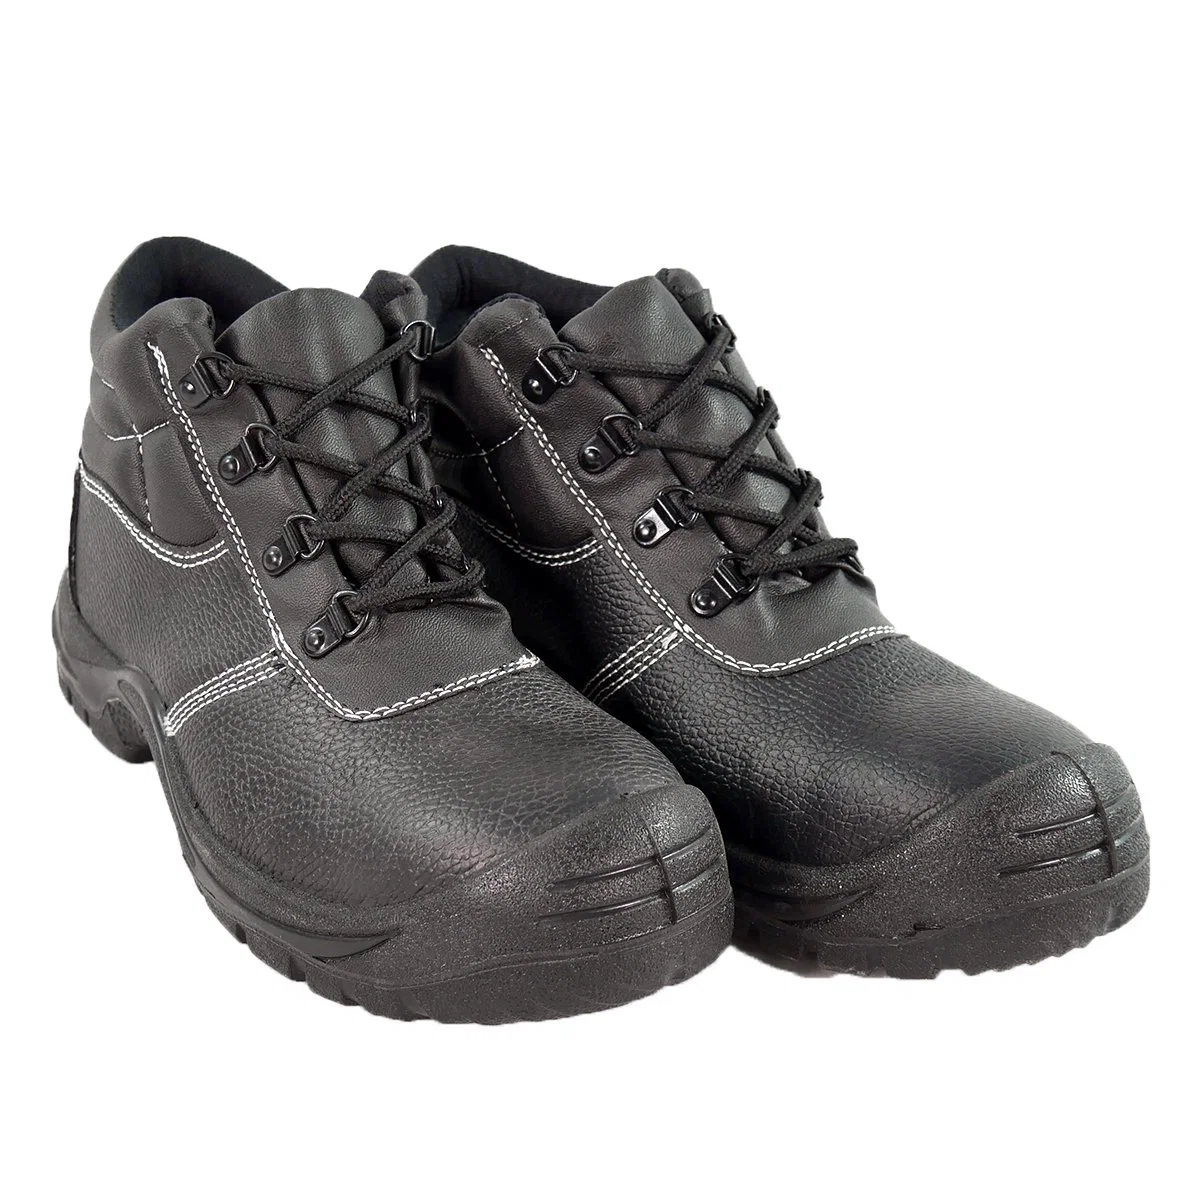 Wholesale Hot Selling Classic High Quality Steel Toe Safety Shoes for Men Safety Work Shoes Indestructible Anti-Smash